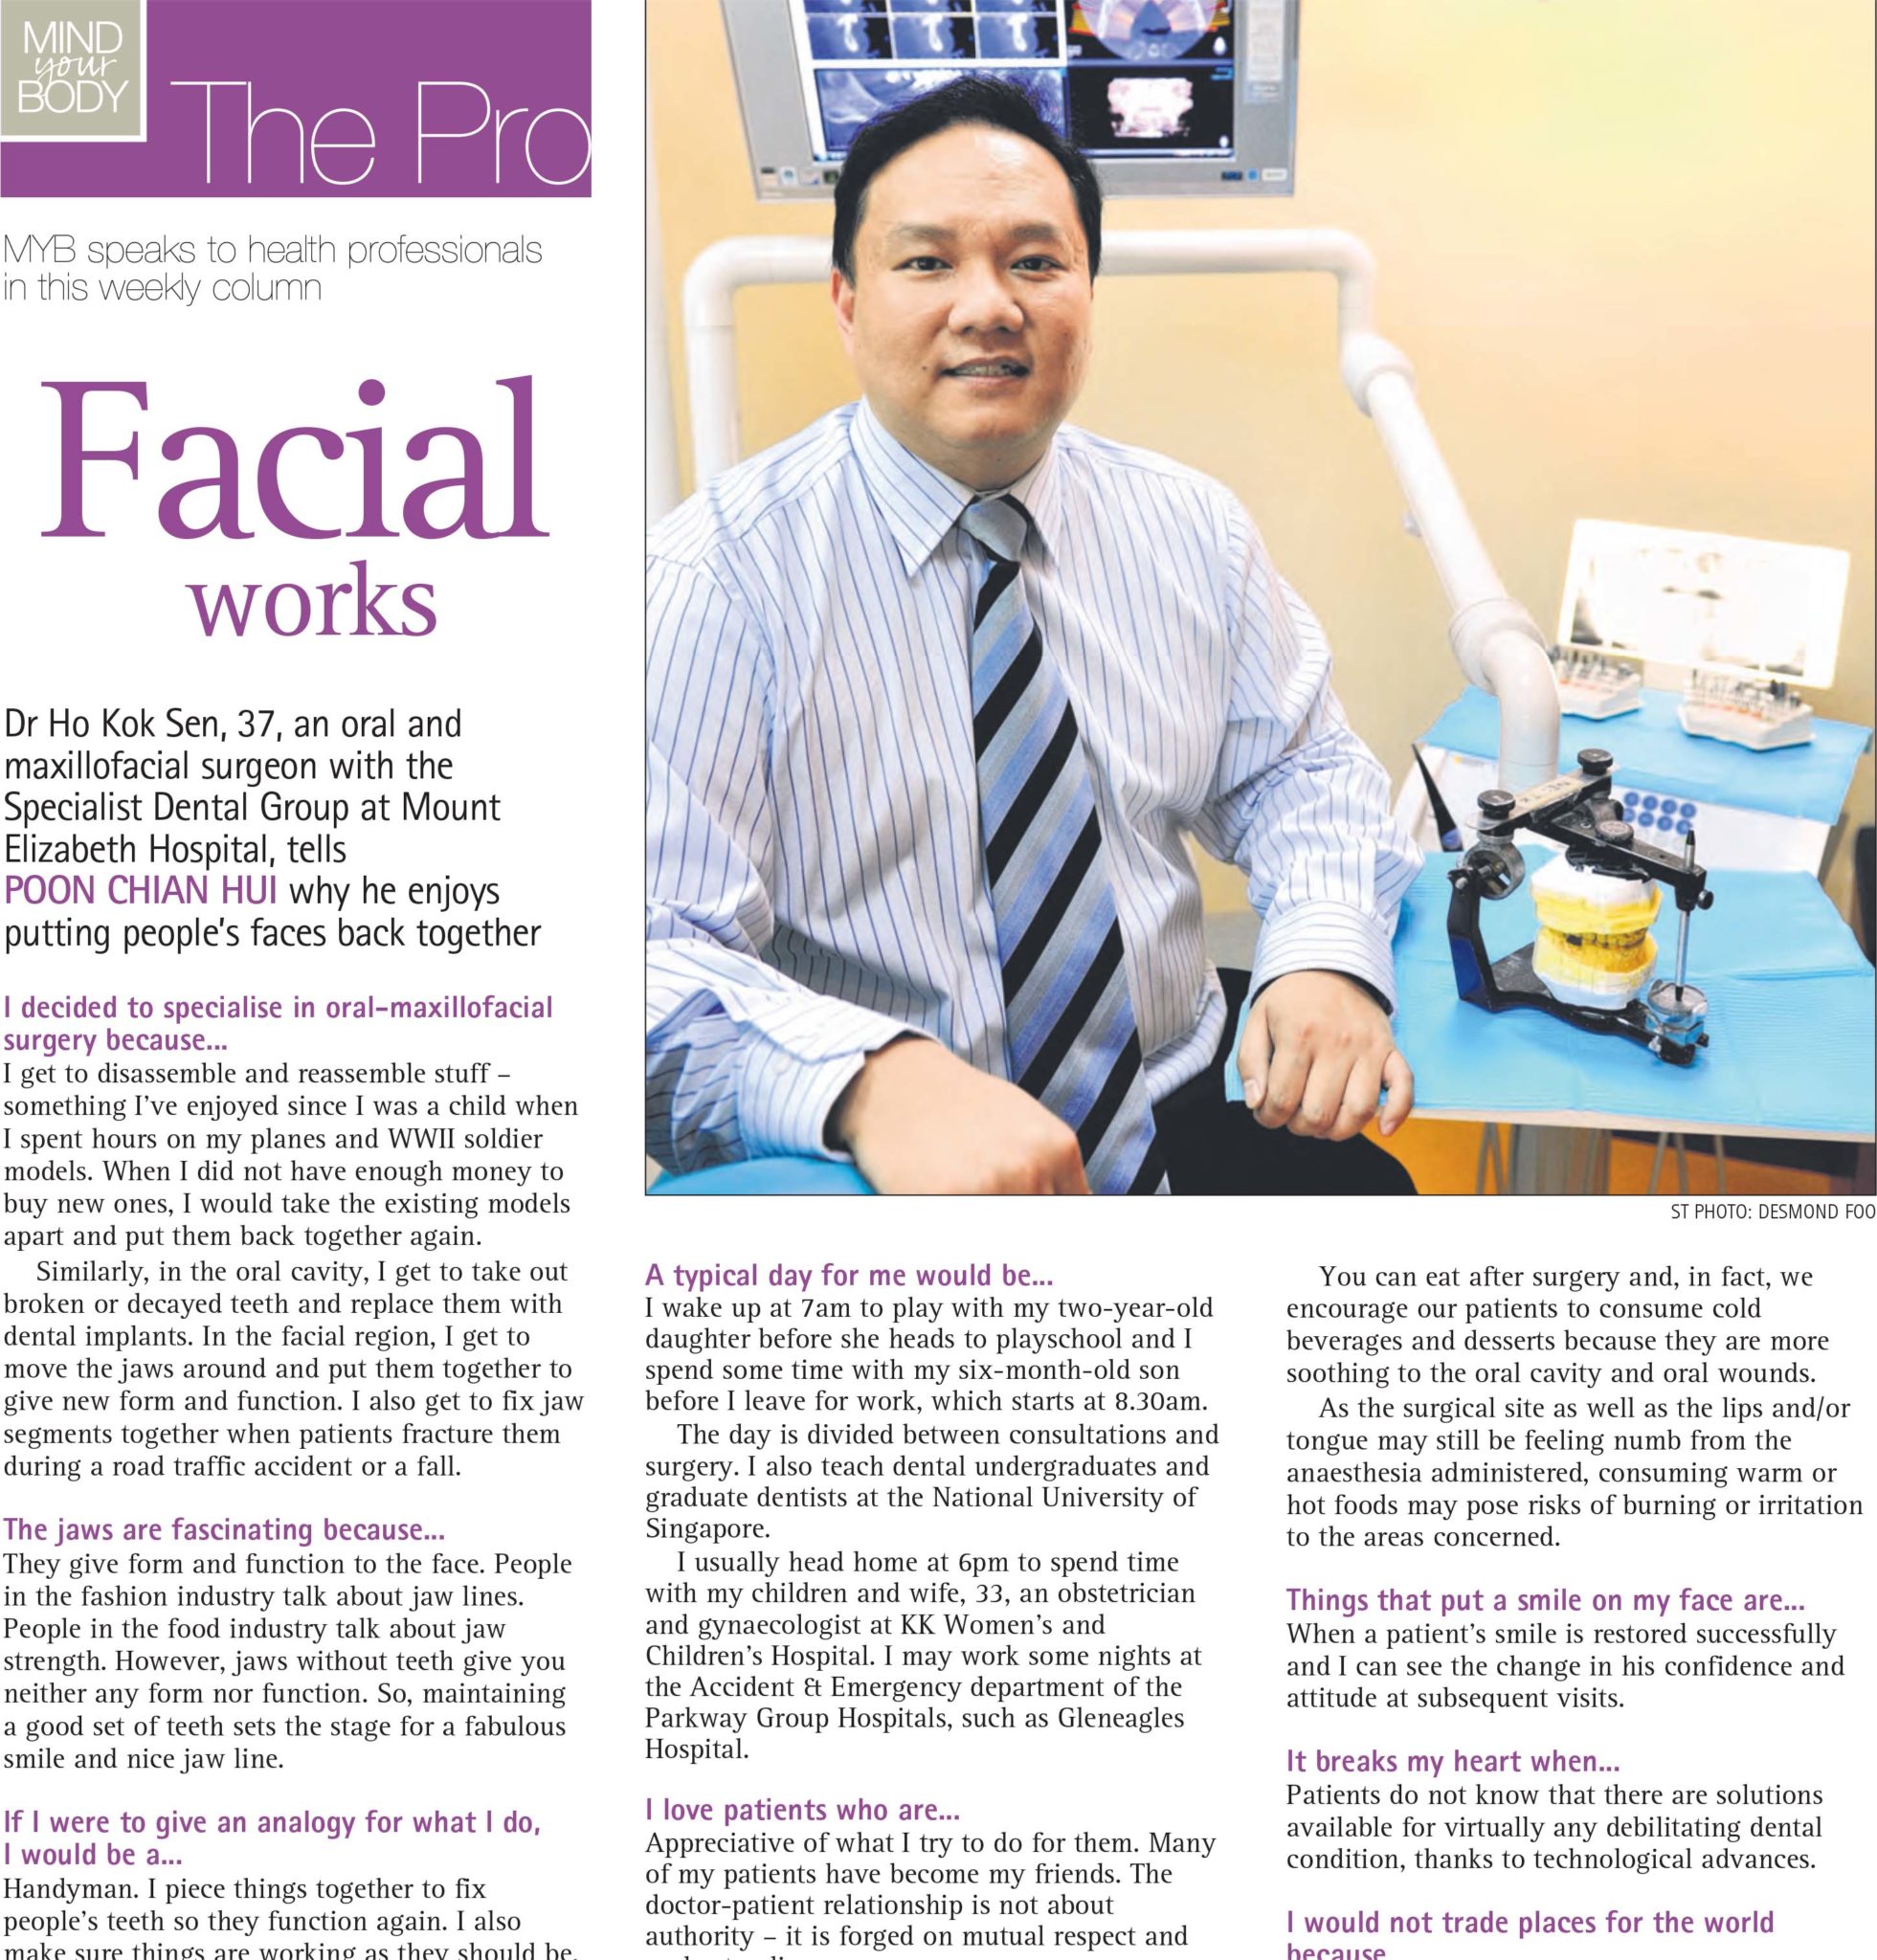 Straits Times, 17 Desember 2009: ST MYB Facial works (zh)